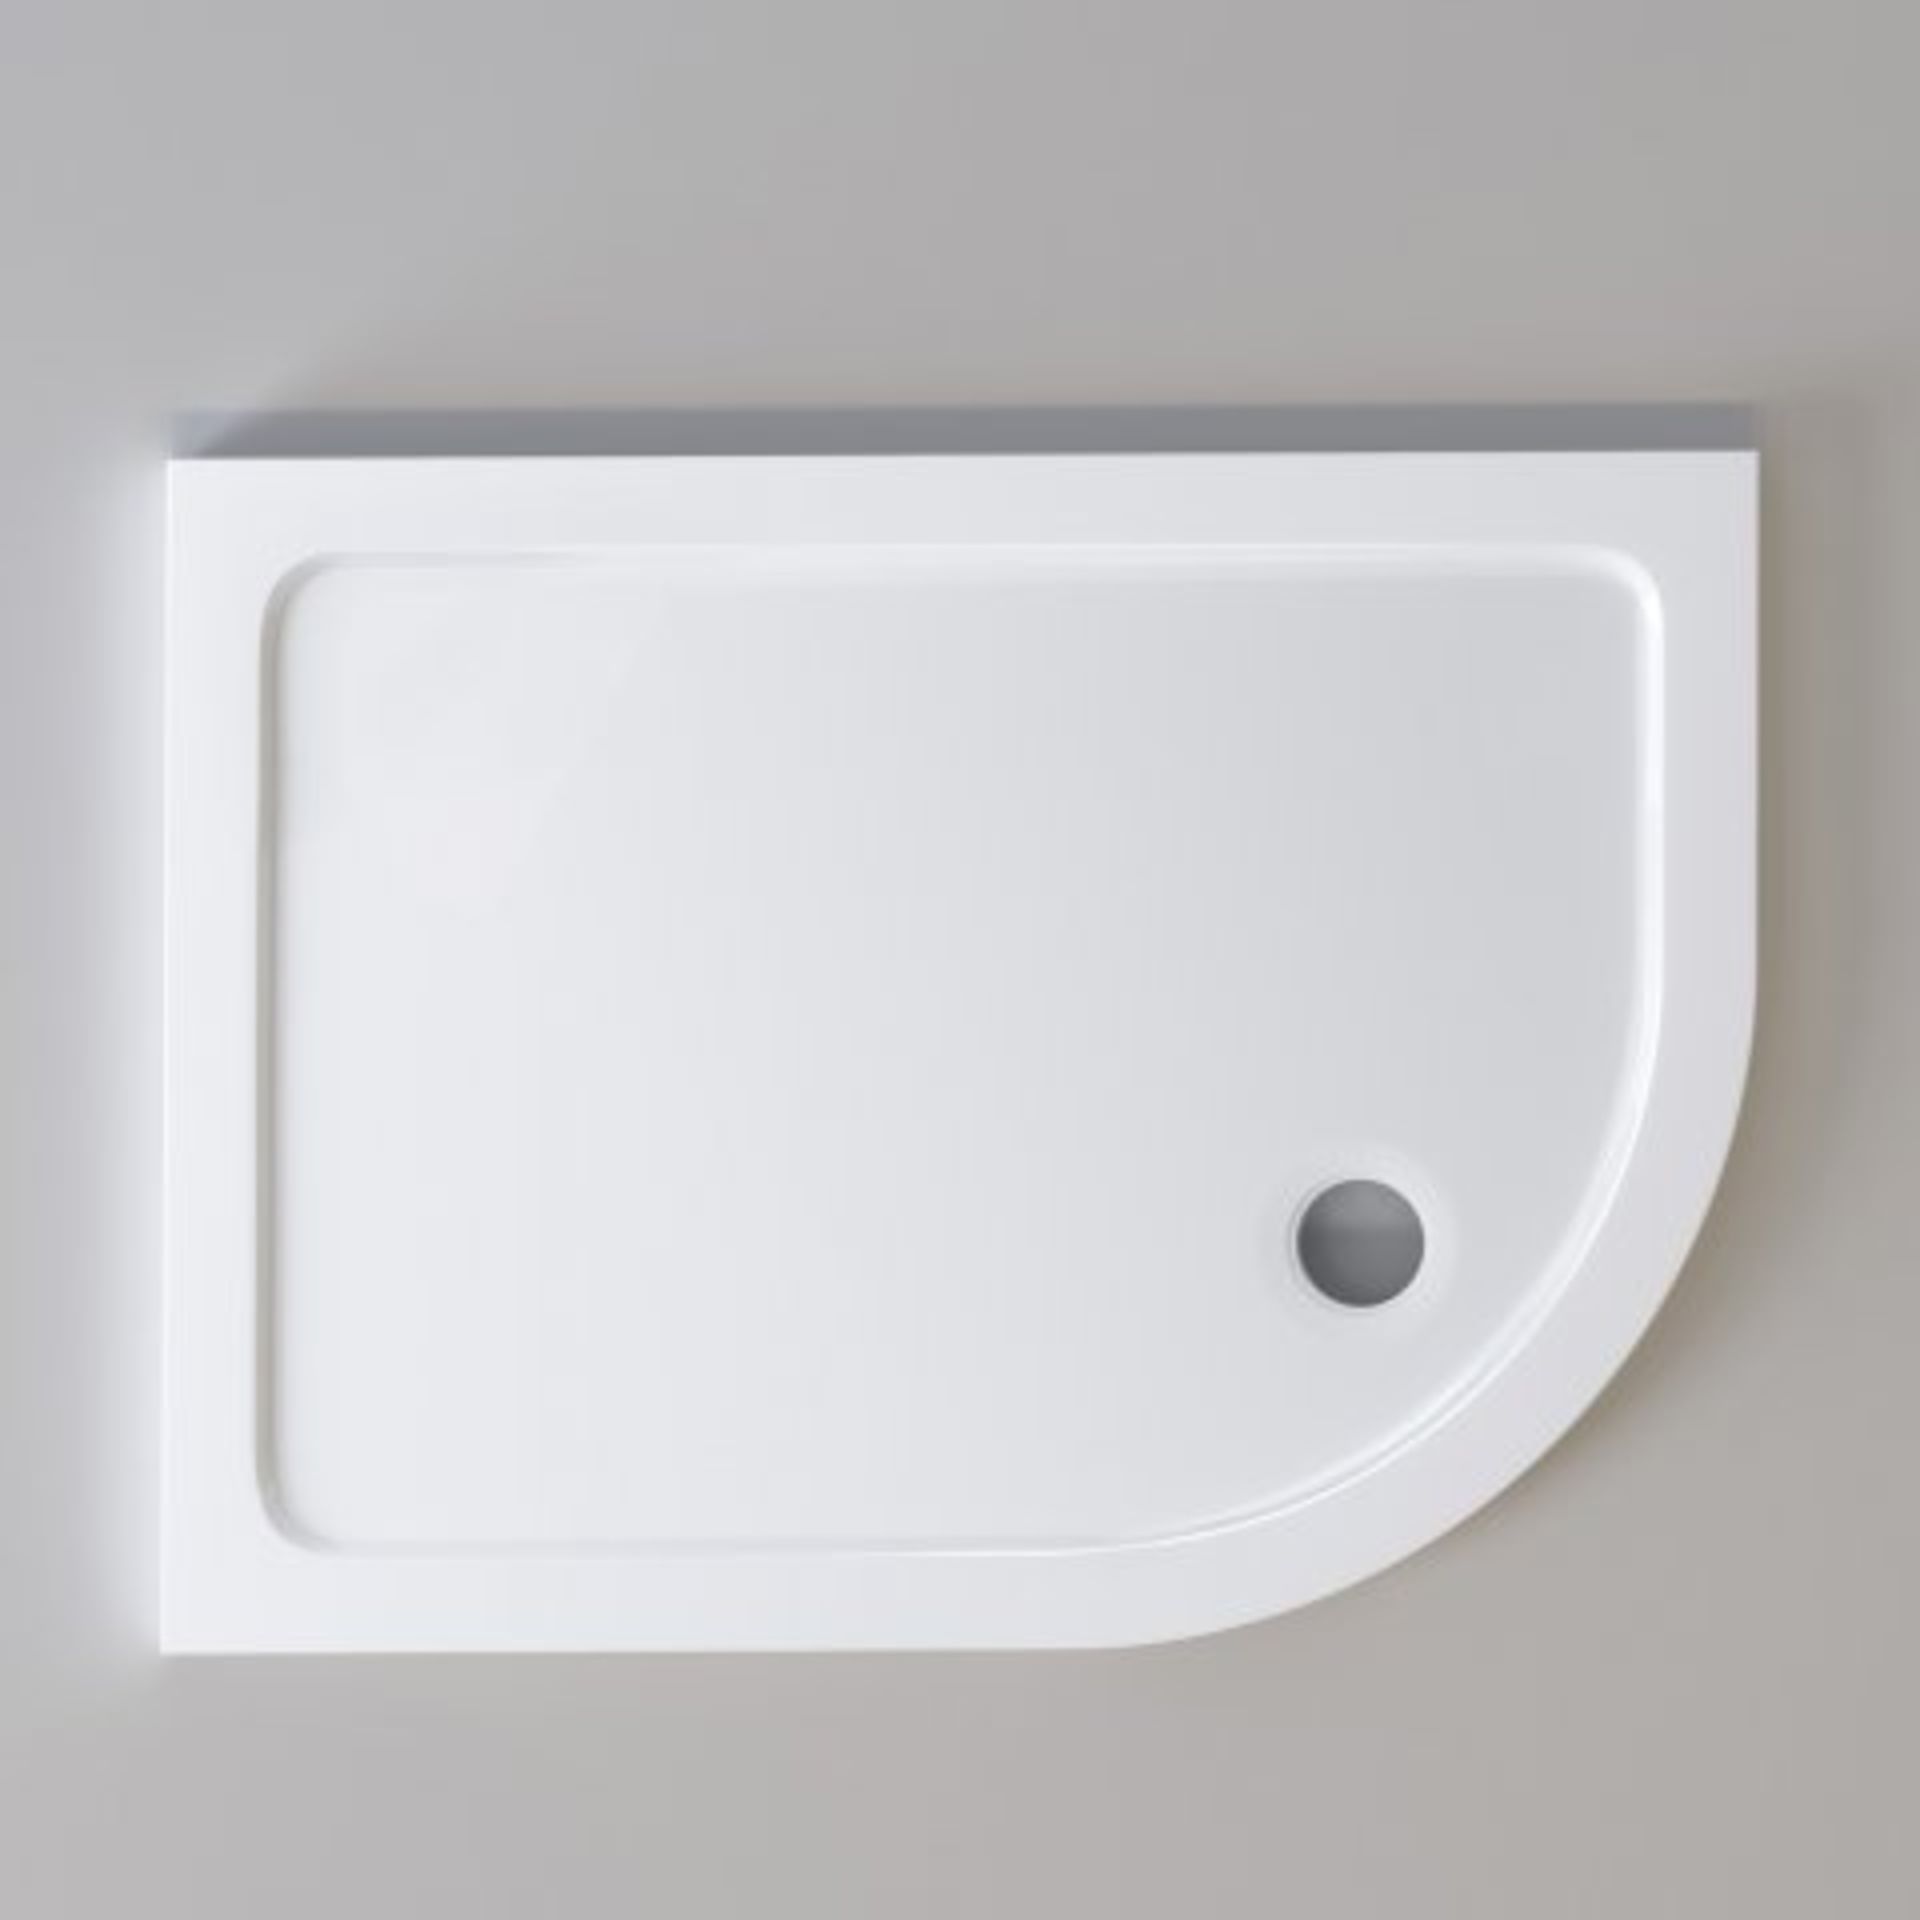 (N218) 1200x900mm Offset Quadrant Ultraslim Stone Shower Tray - Right. RRP £324.99. Magnificently - Image 2 of 2